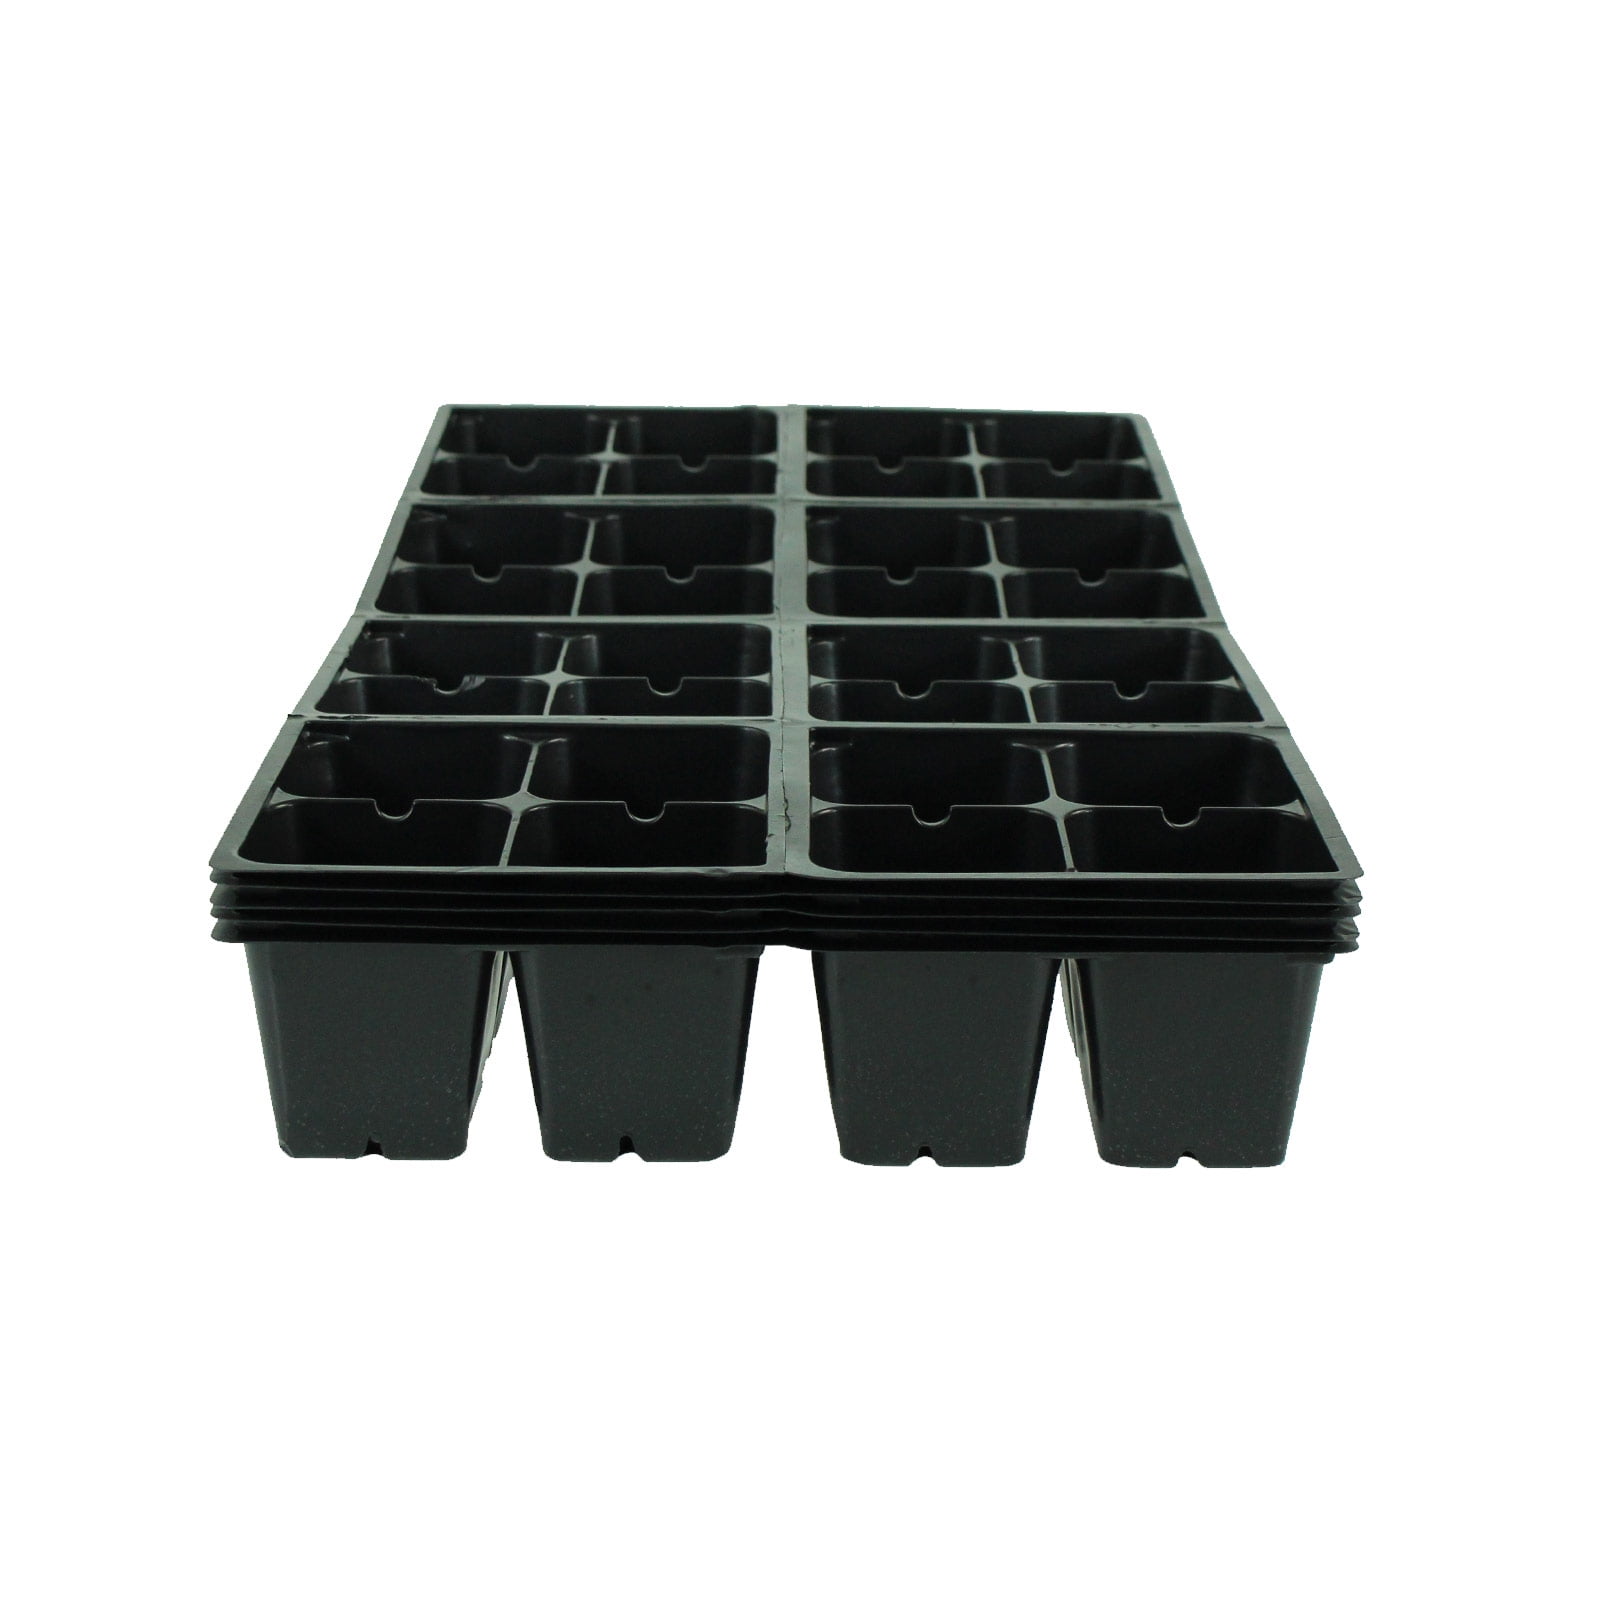 SEED STARTER GARDEN TRAY INSERTS PLANT NURSERY 72 NESTED PLANTING POT CELLS 